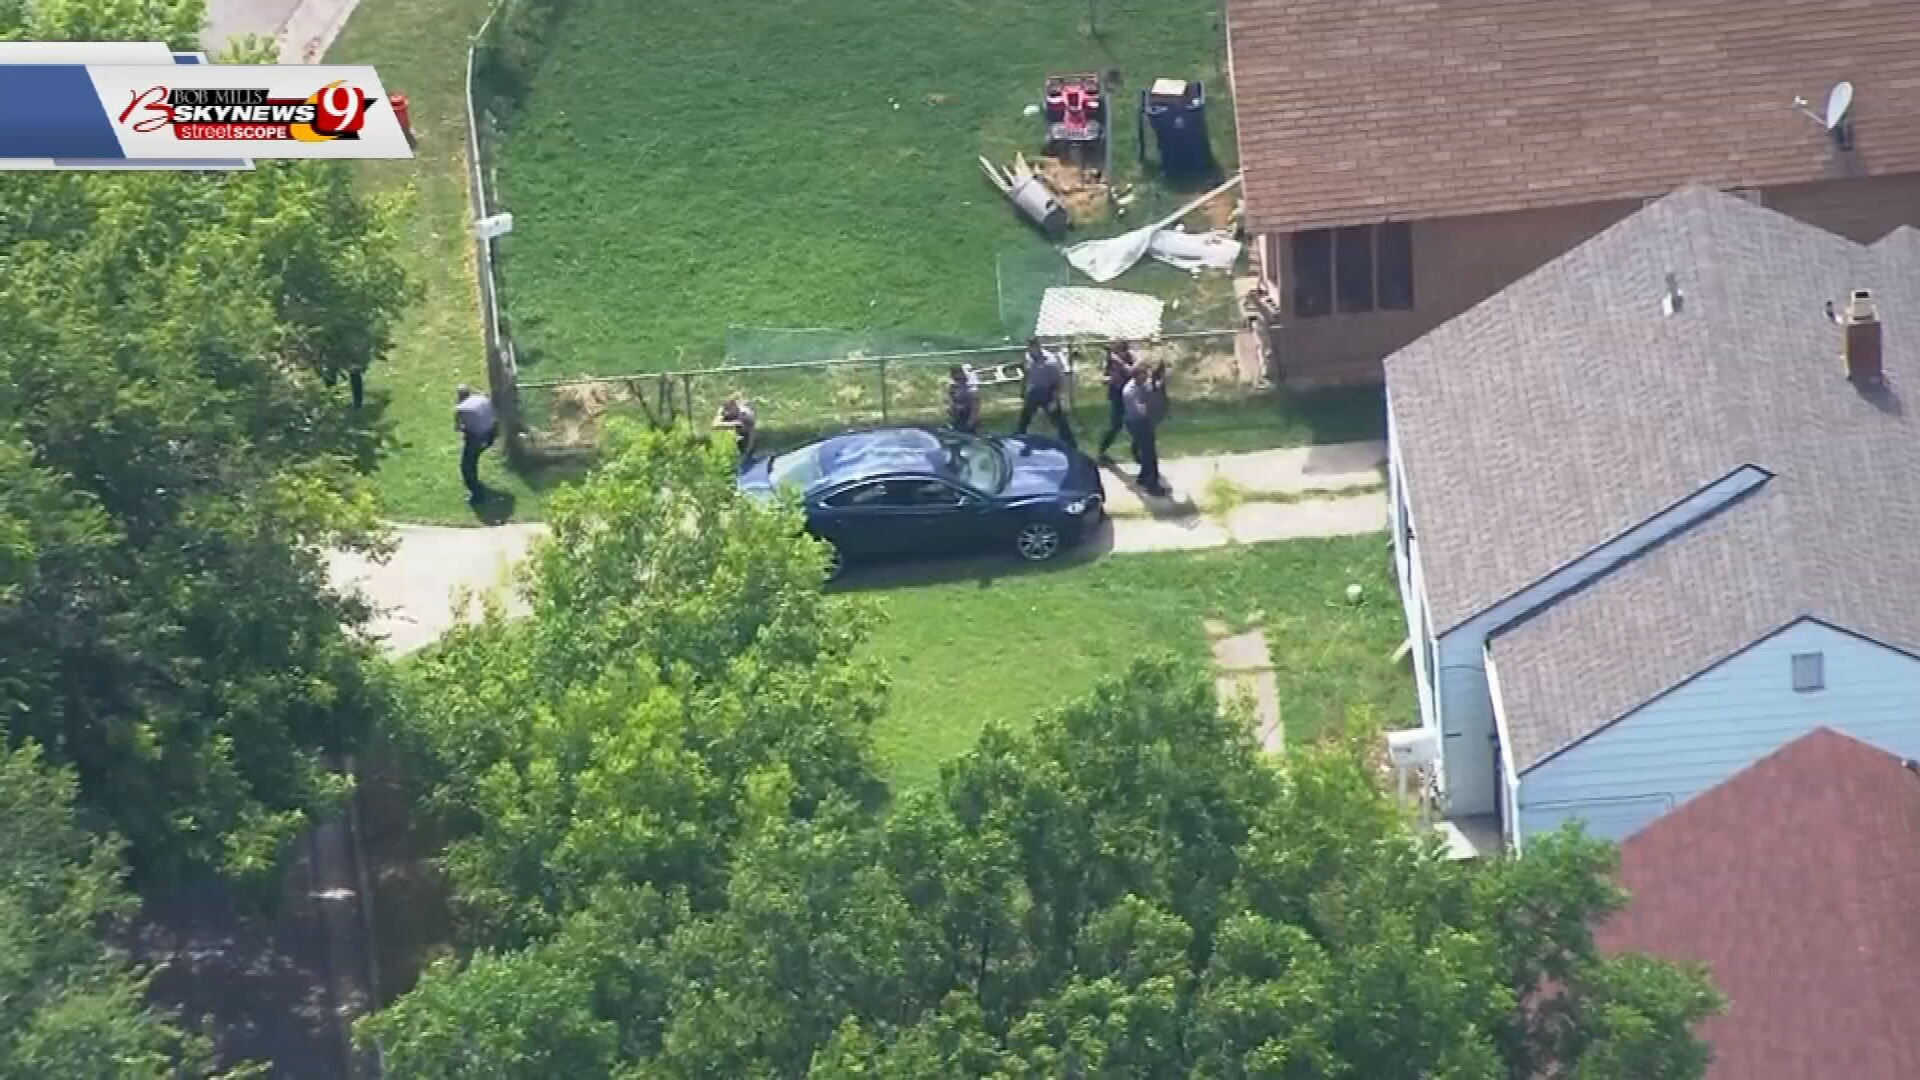 1 Person Dead, 1 Officer Hit After Long Standoff In OKC